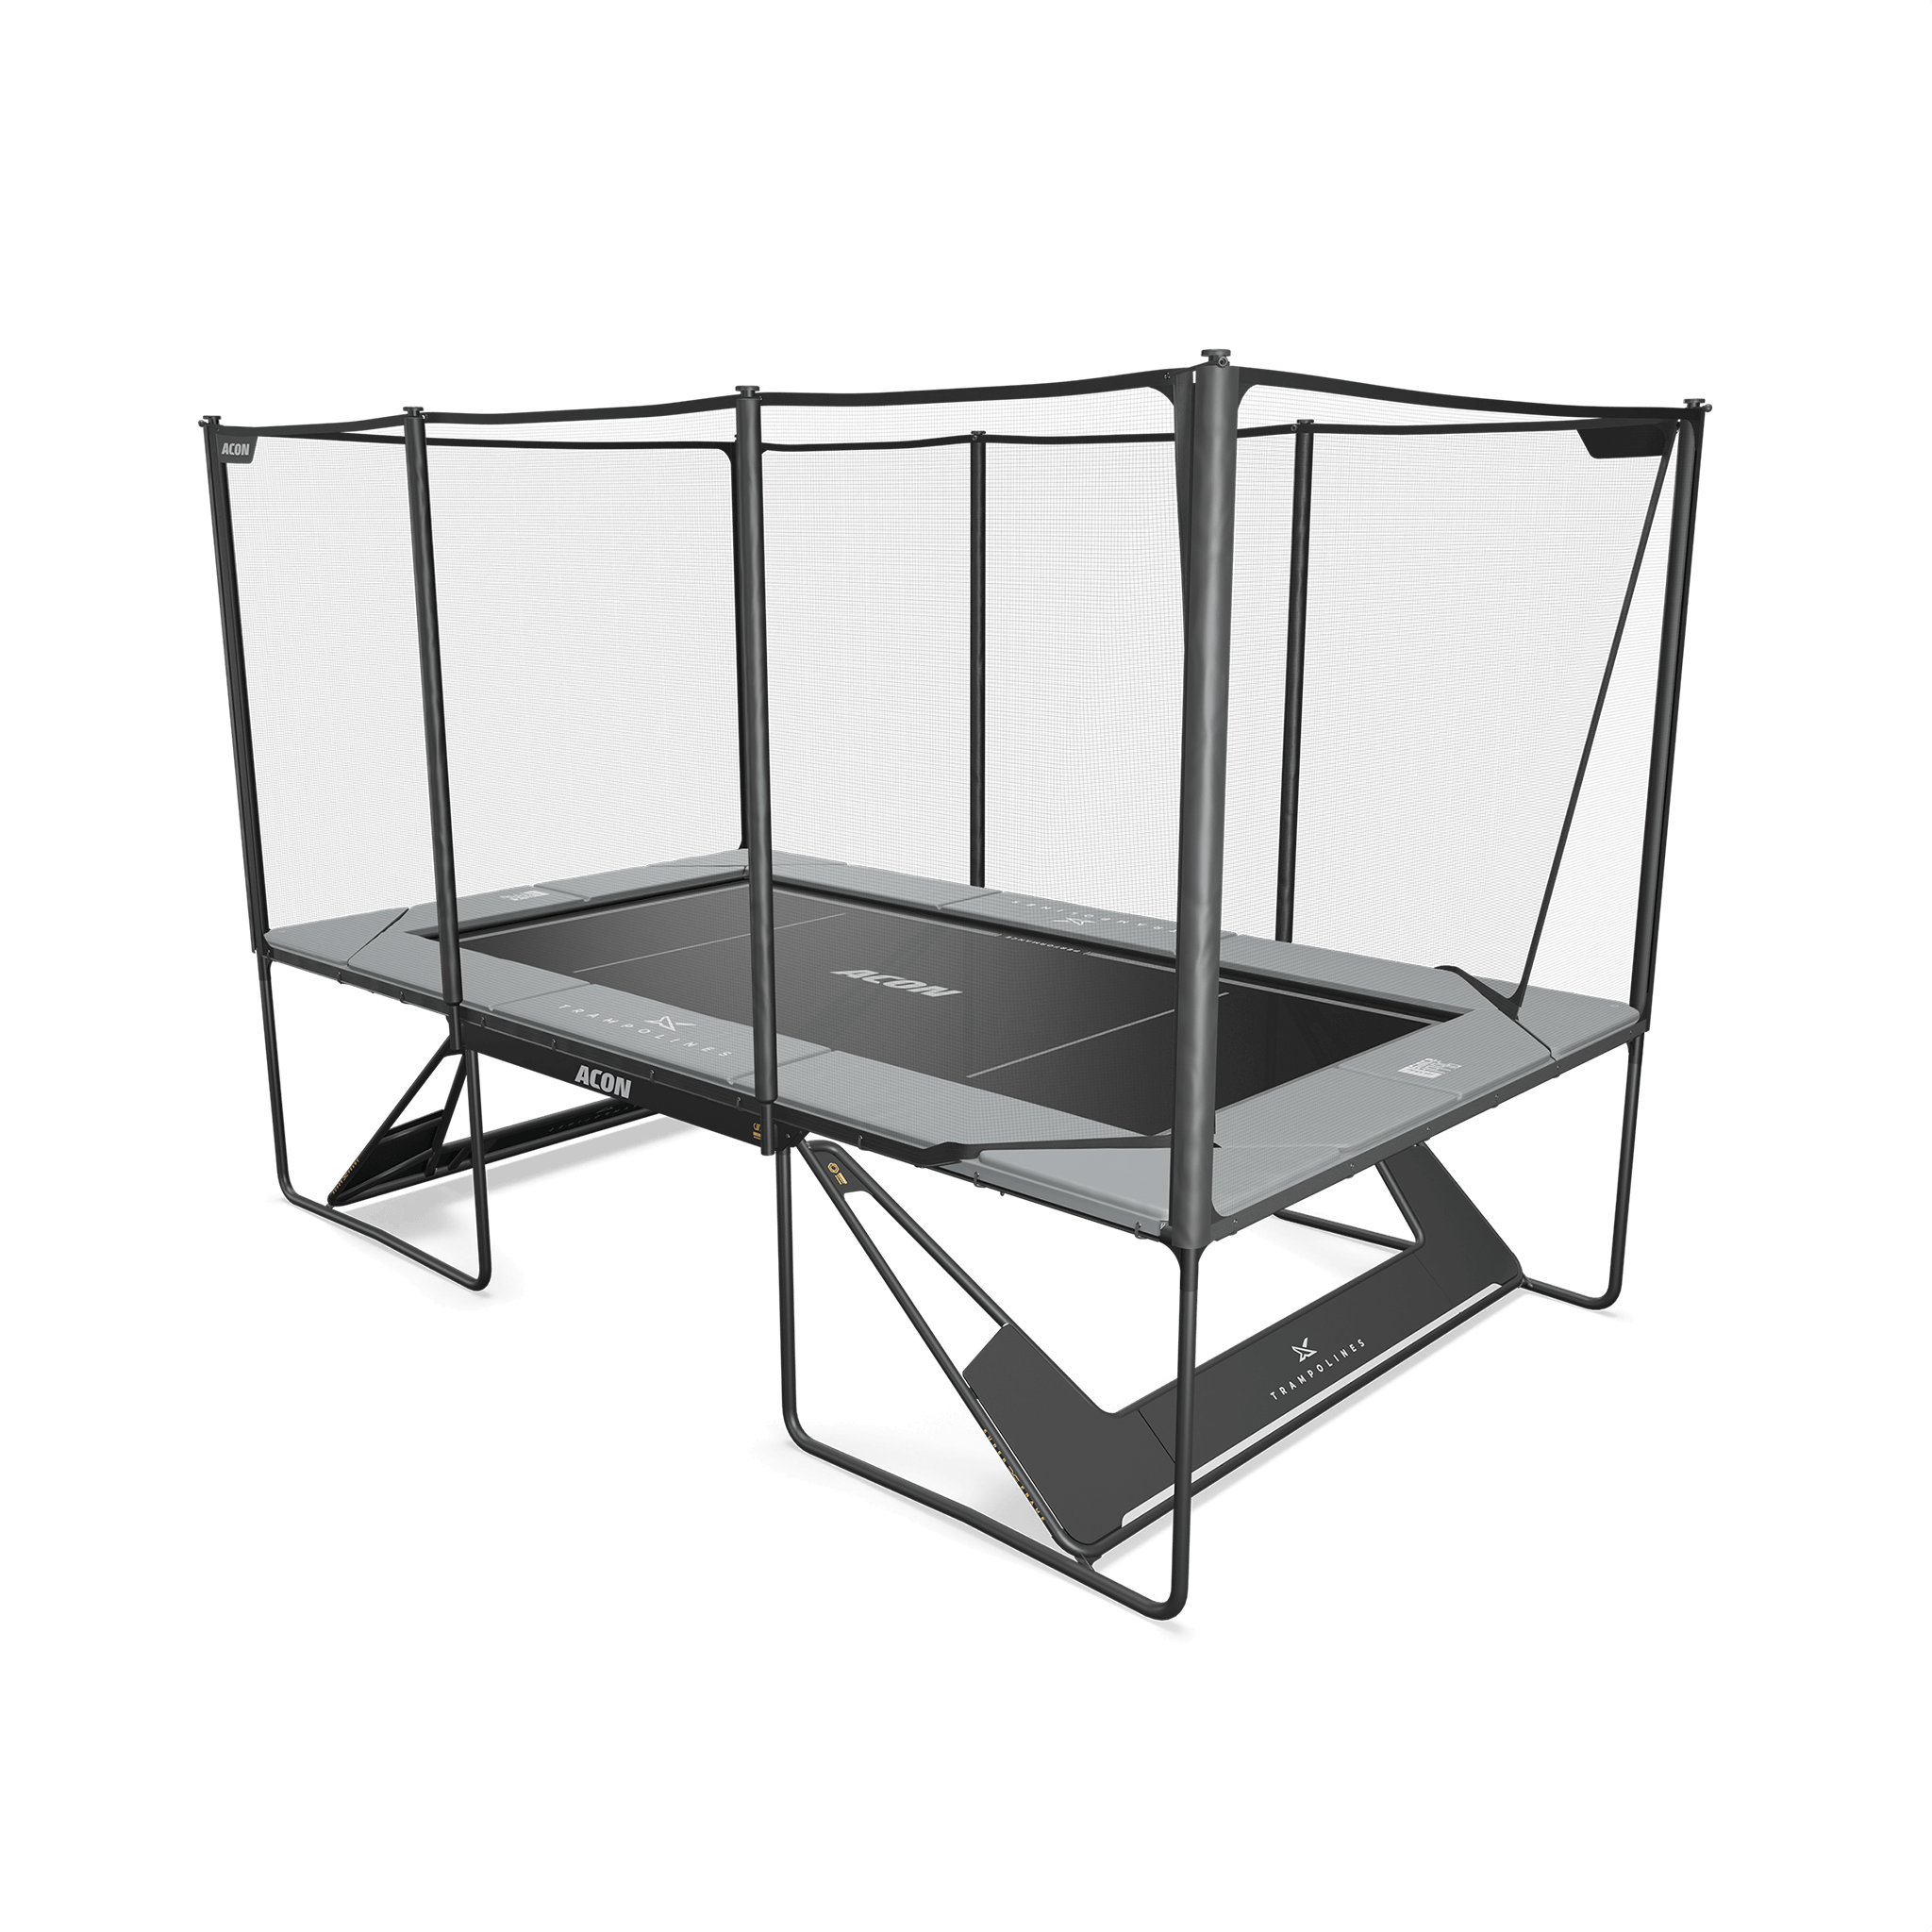 Image of the Performance Mat installed to an Acon X trampoline, Grey